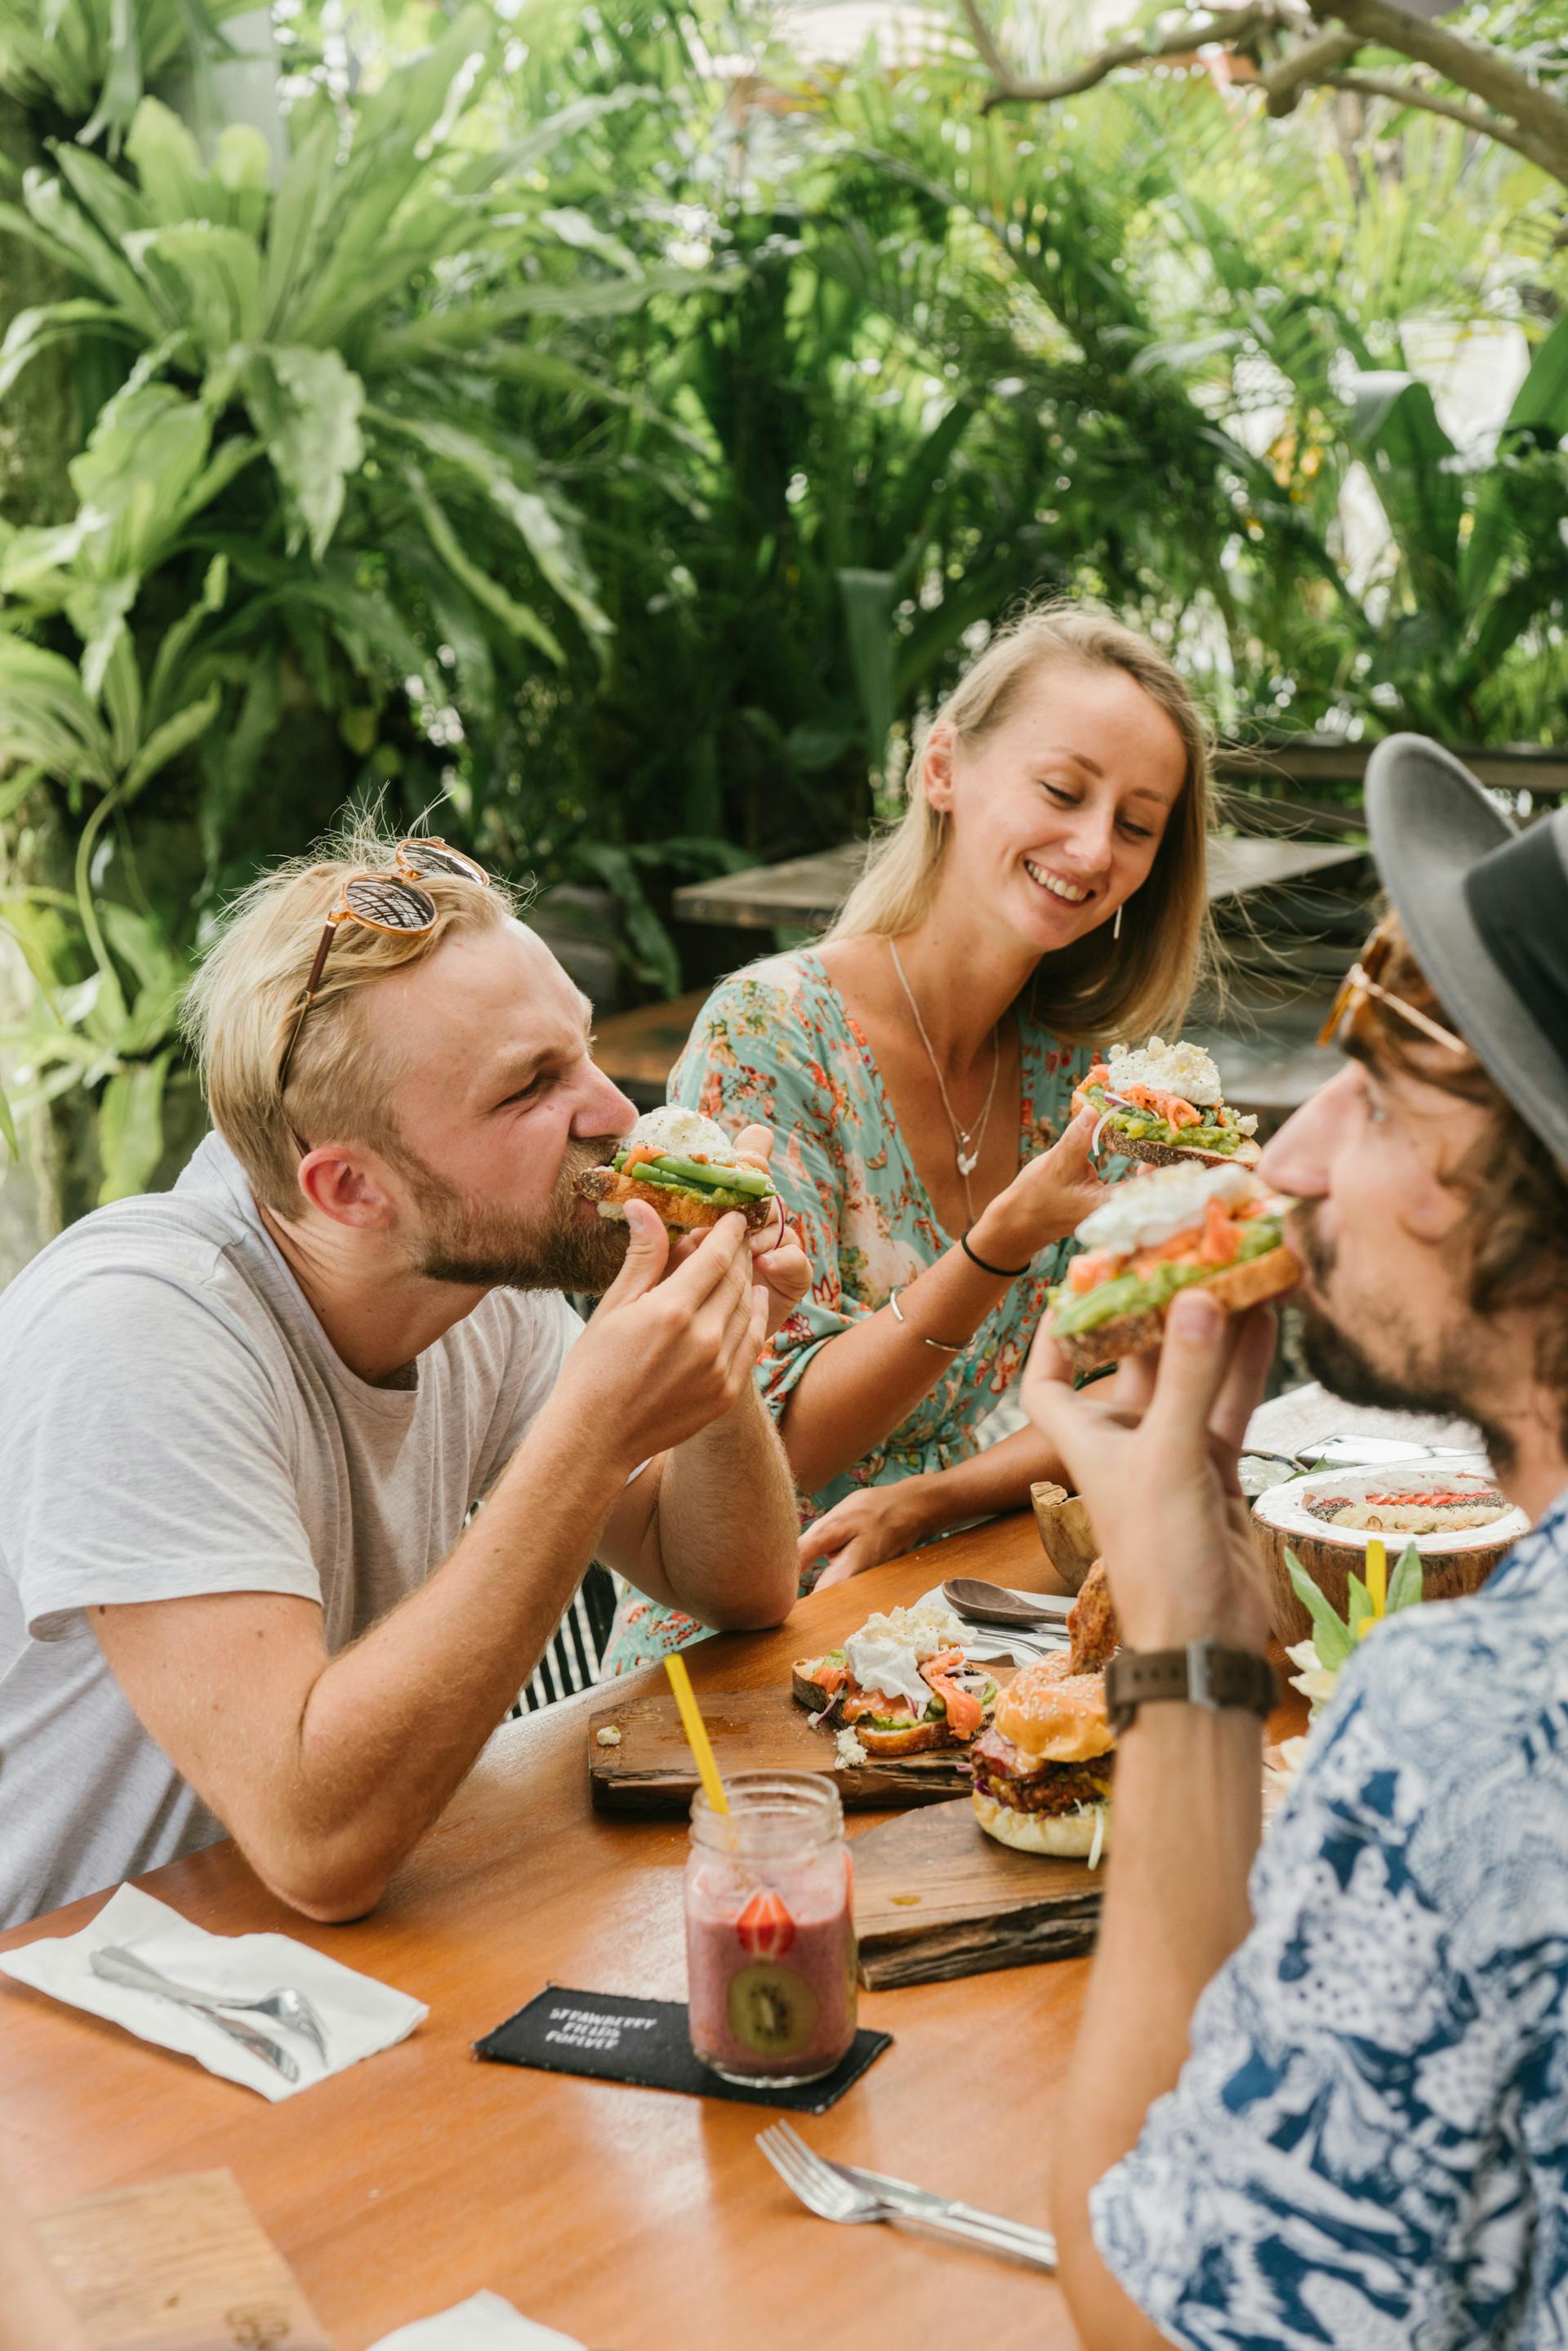 Friends eating at a restaurant | Source: Pexels